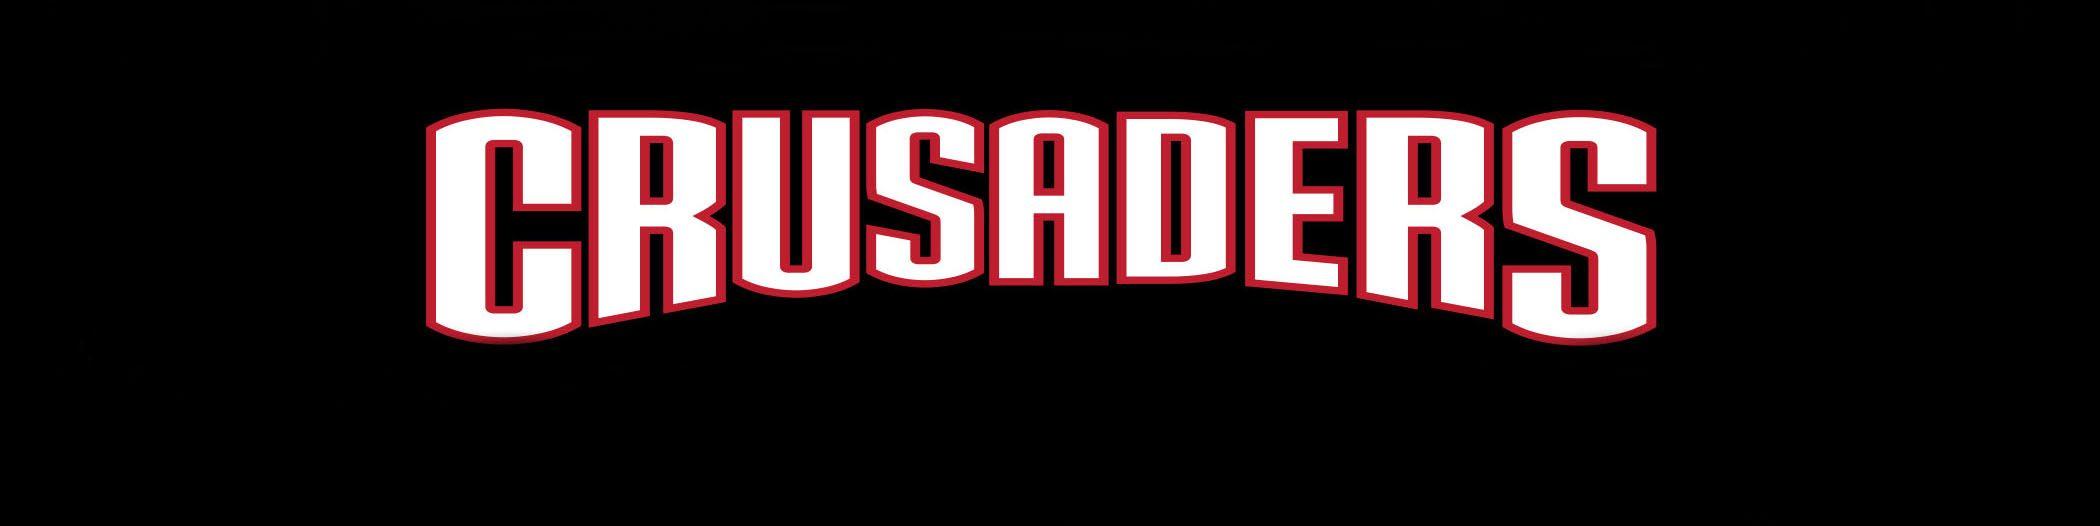 Crusaders Baseball Logo - Crusaders Baseball | Crusader Sports NW